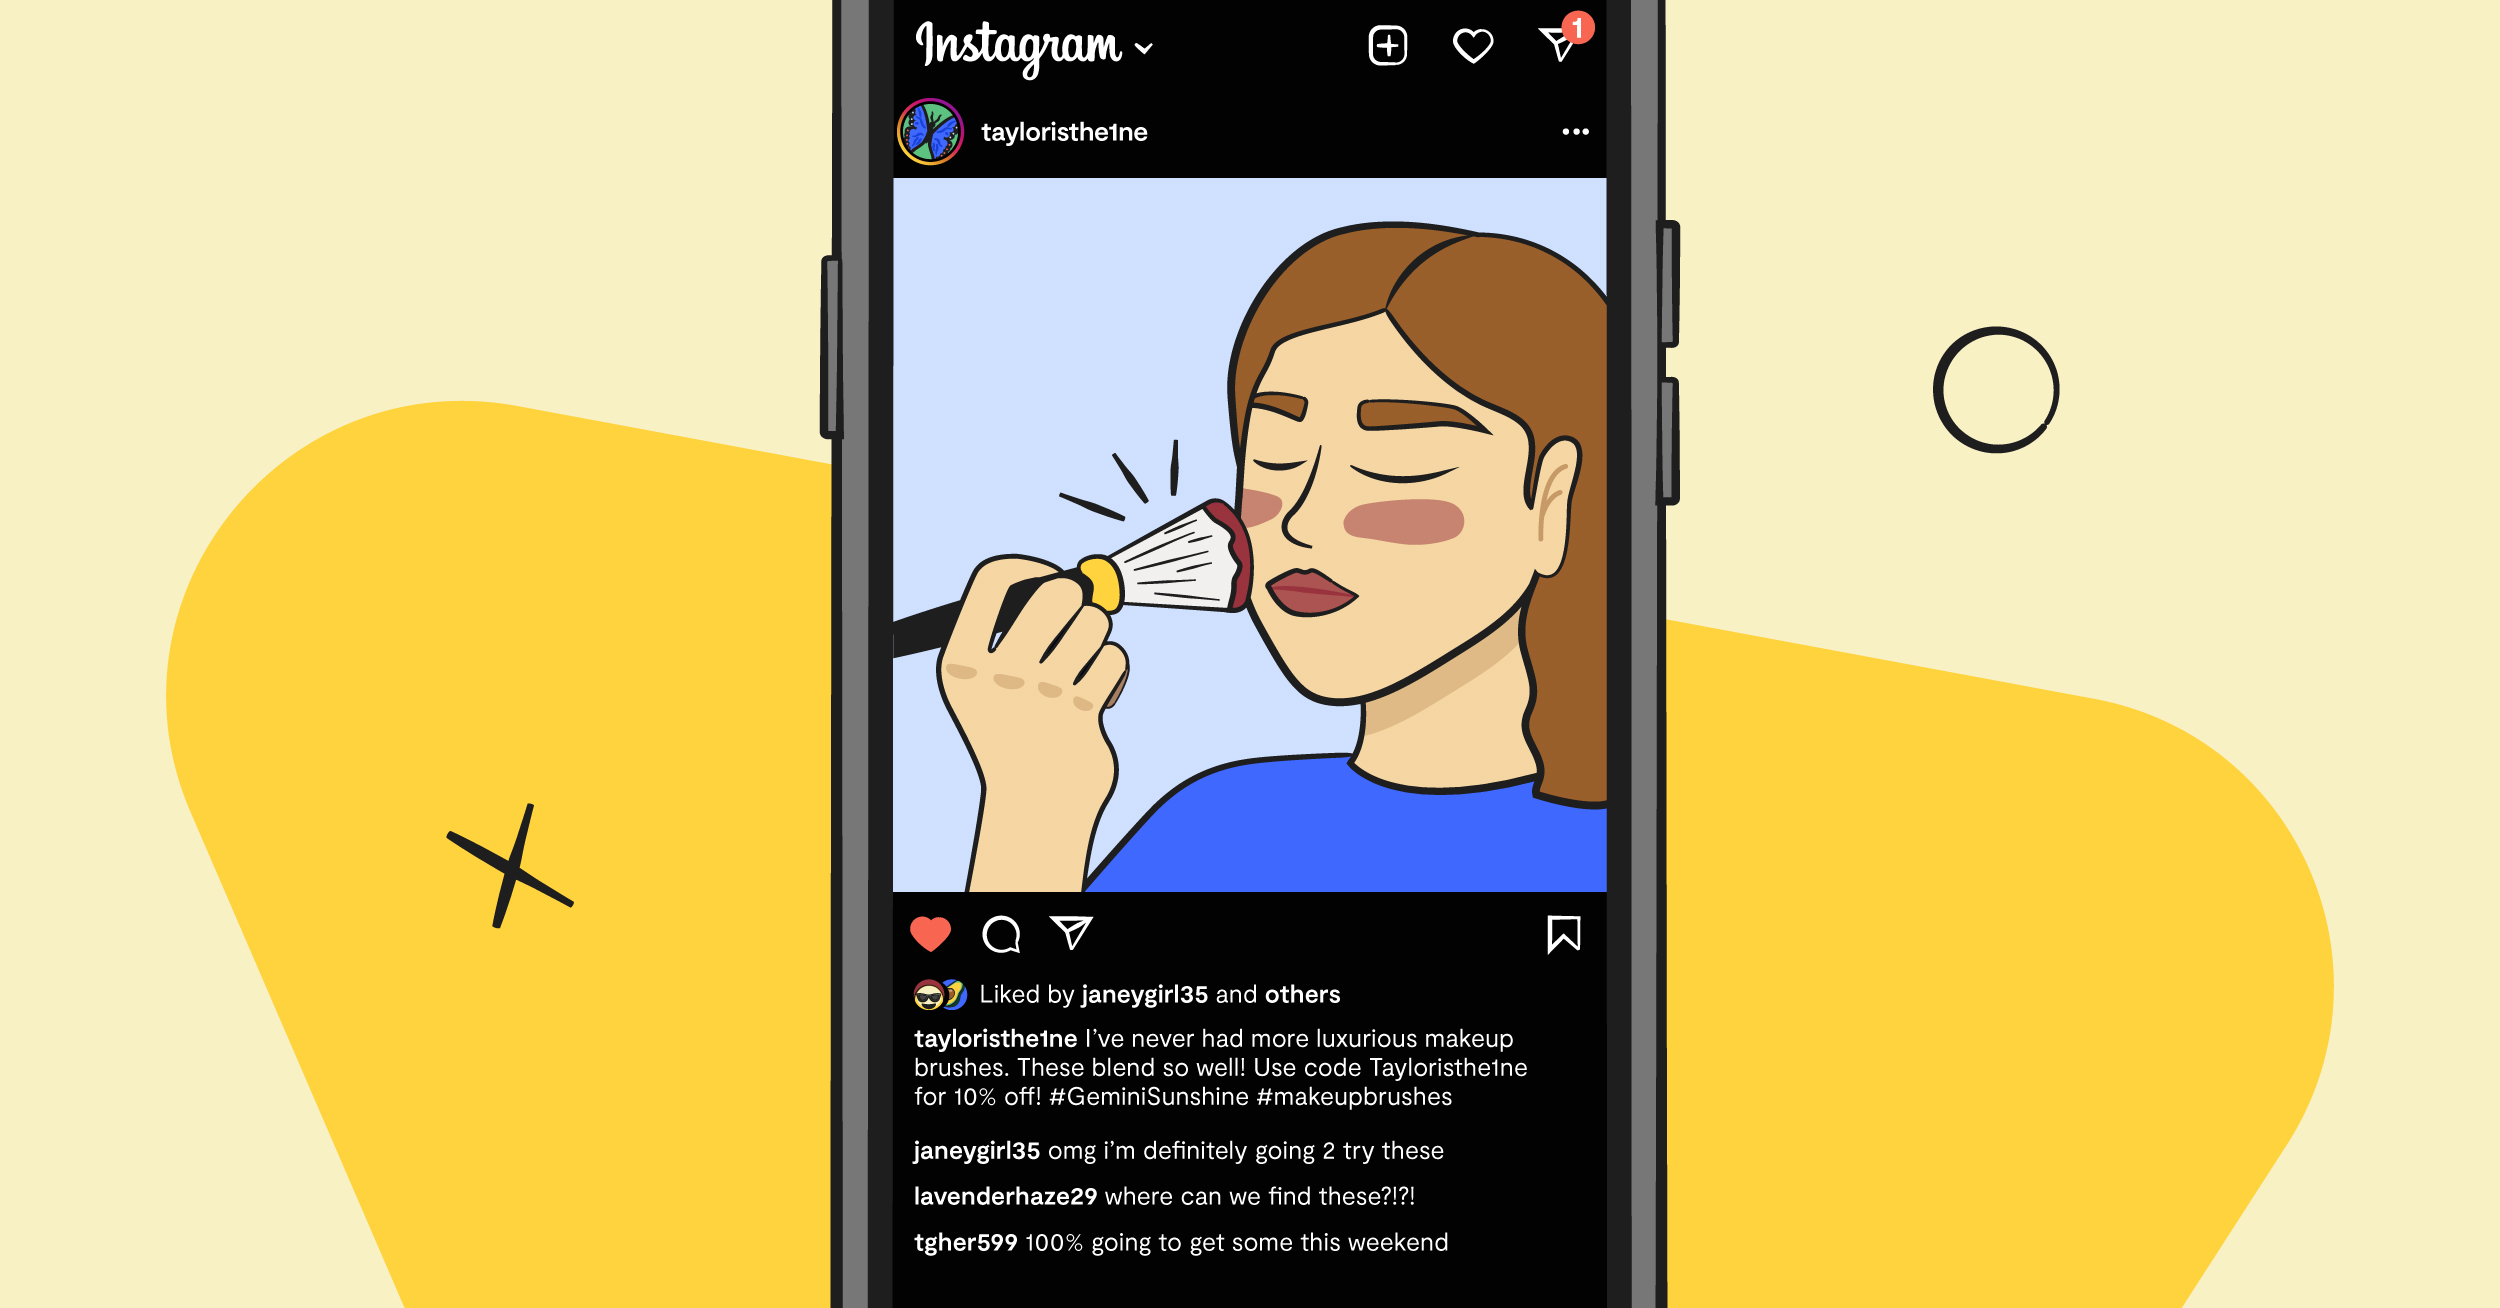 Increasing content relevancy to advocate for mental health on Instagram